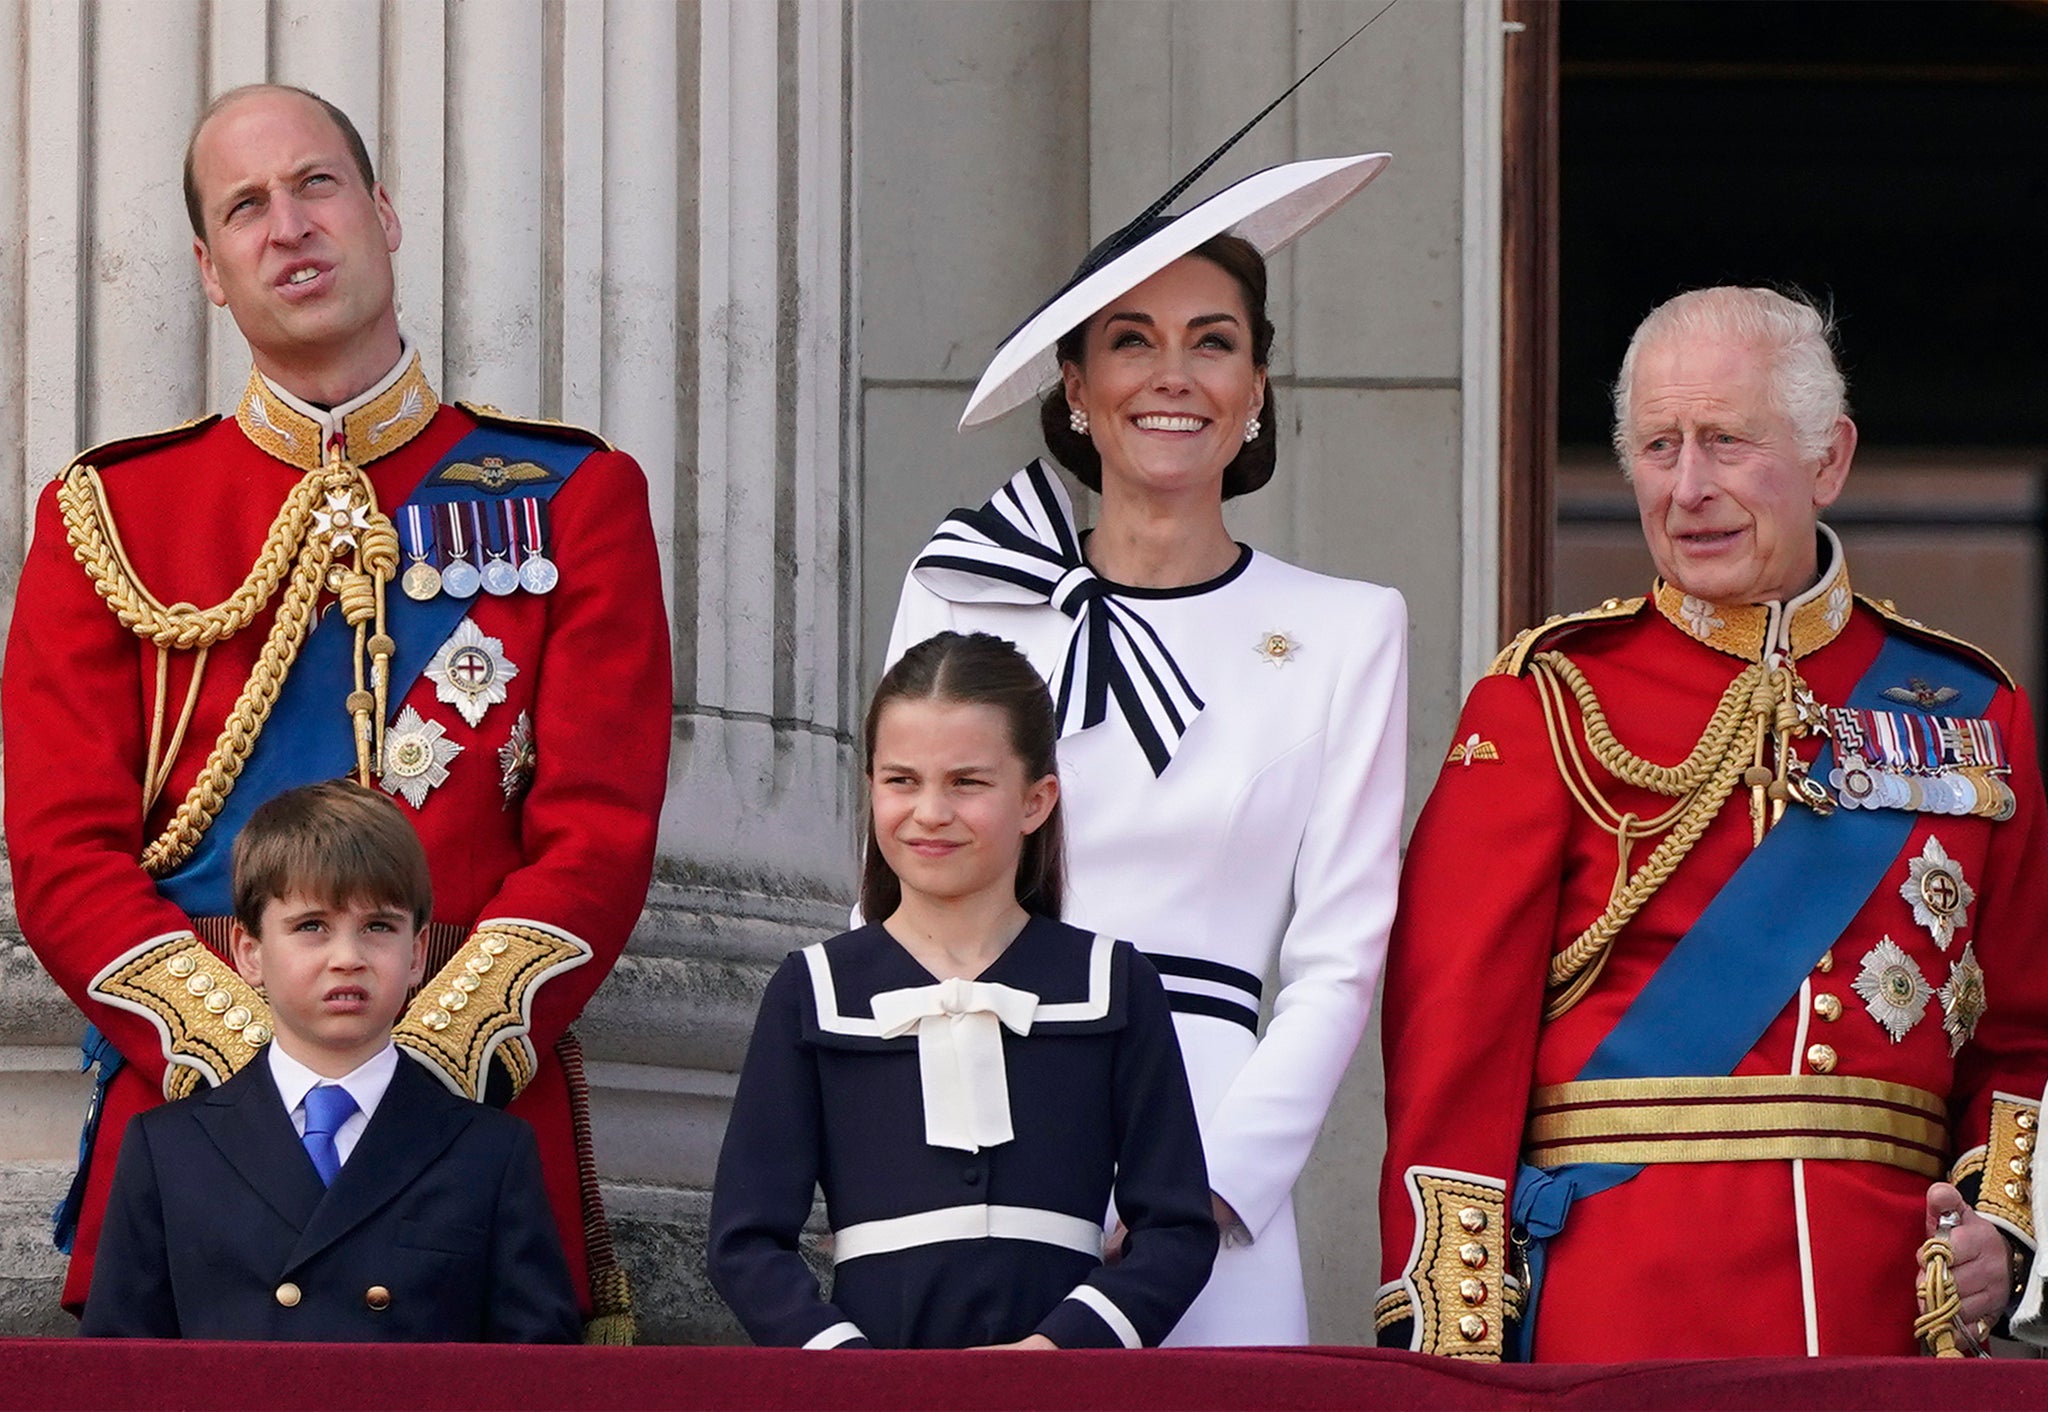 The Princess of Wales looks dazzling as she stands next to the King on the balcony of Buckingham Palace